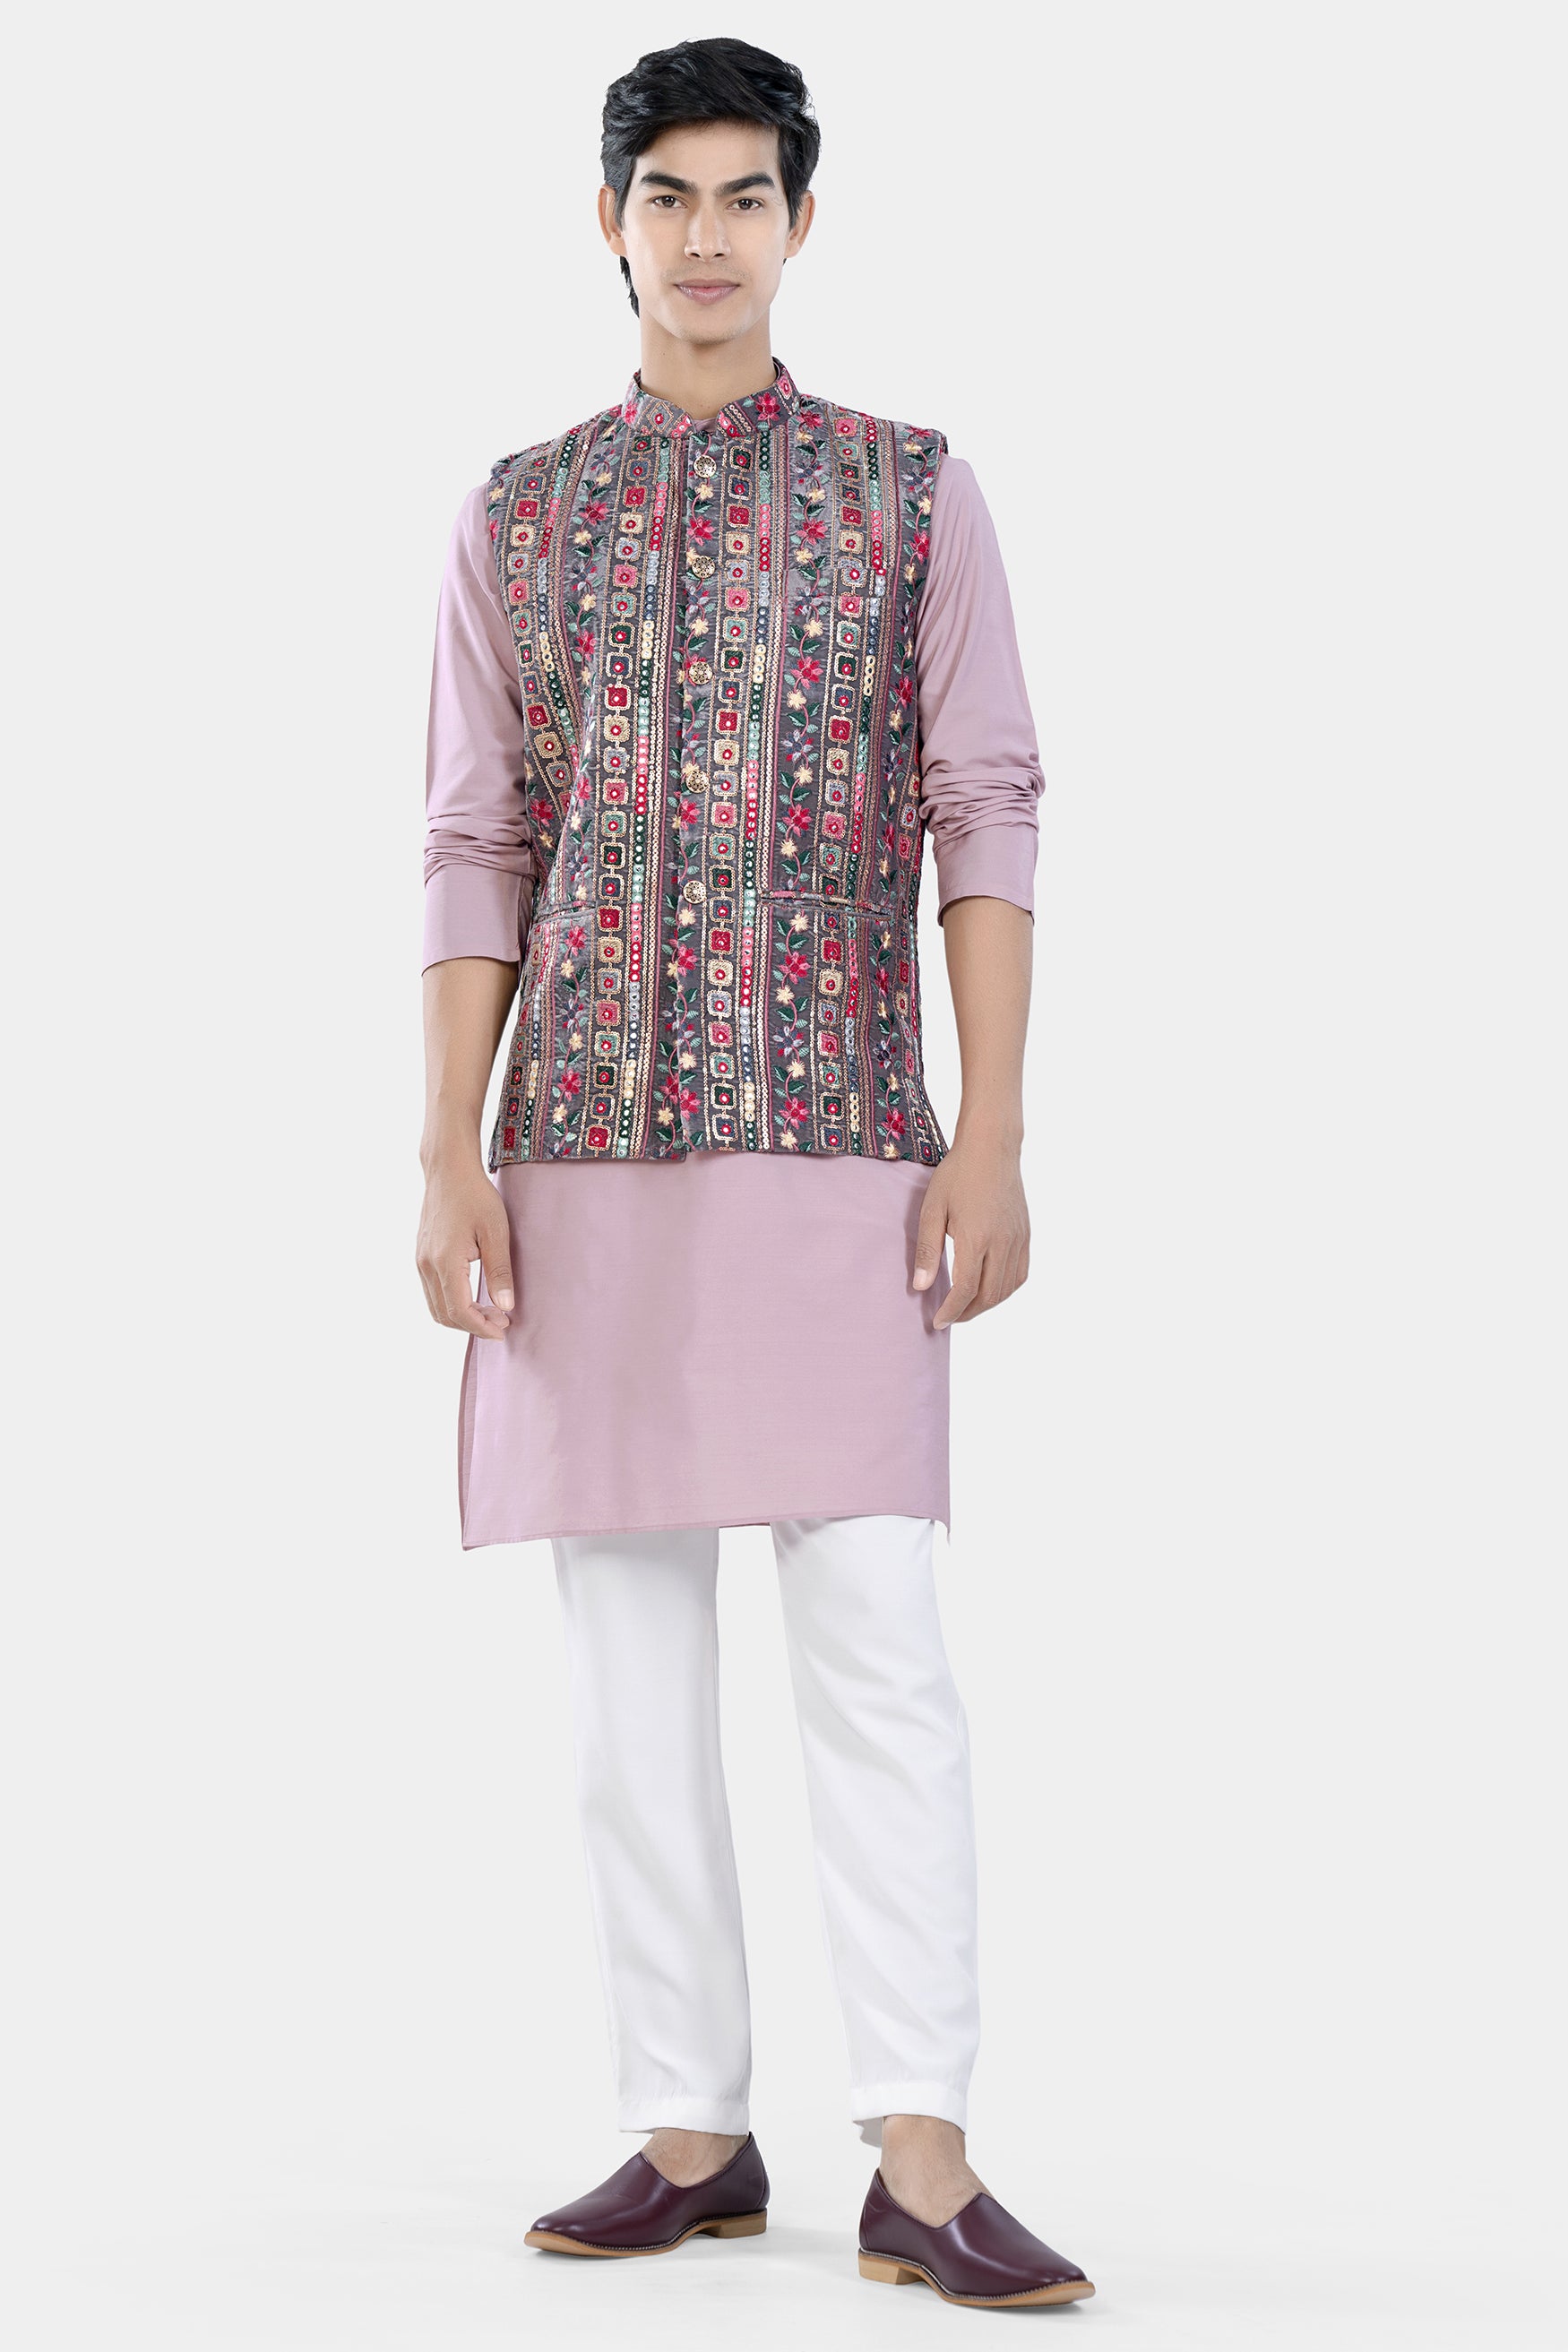 Fedora Gray and Carmine Pink Thread and Sequin Embroidered with Mirror Work Designer Nehru Jacket